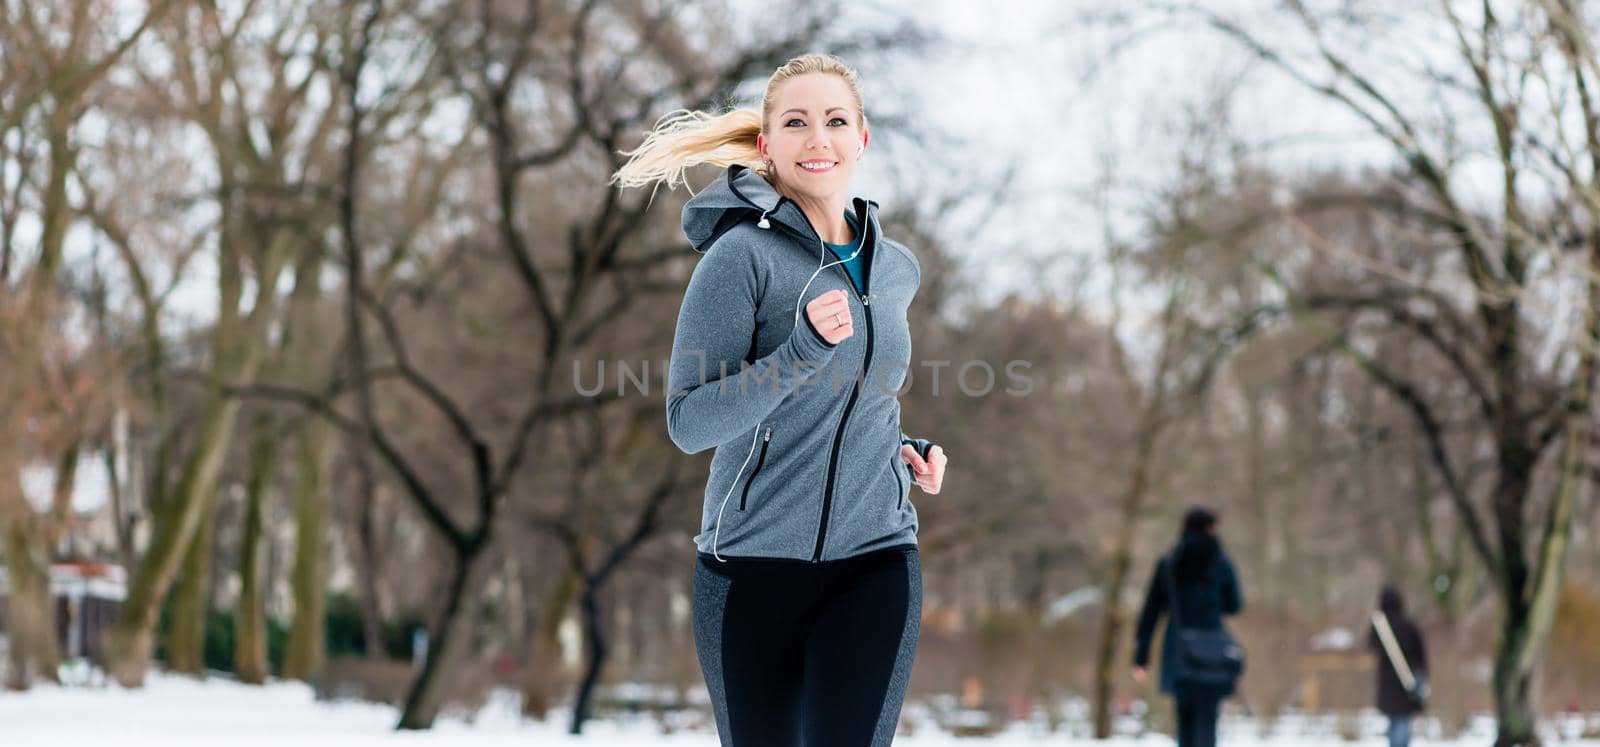 Woman running or jogging down a path on winter day in park